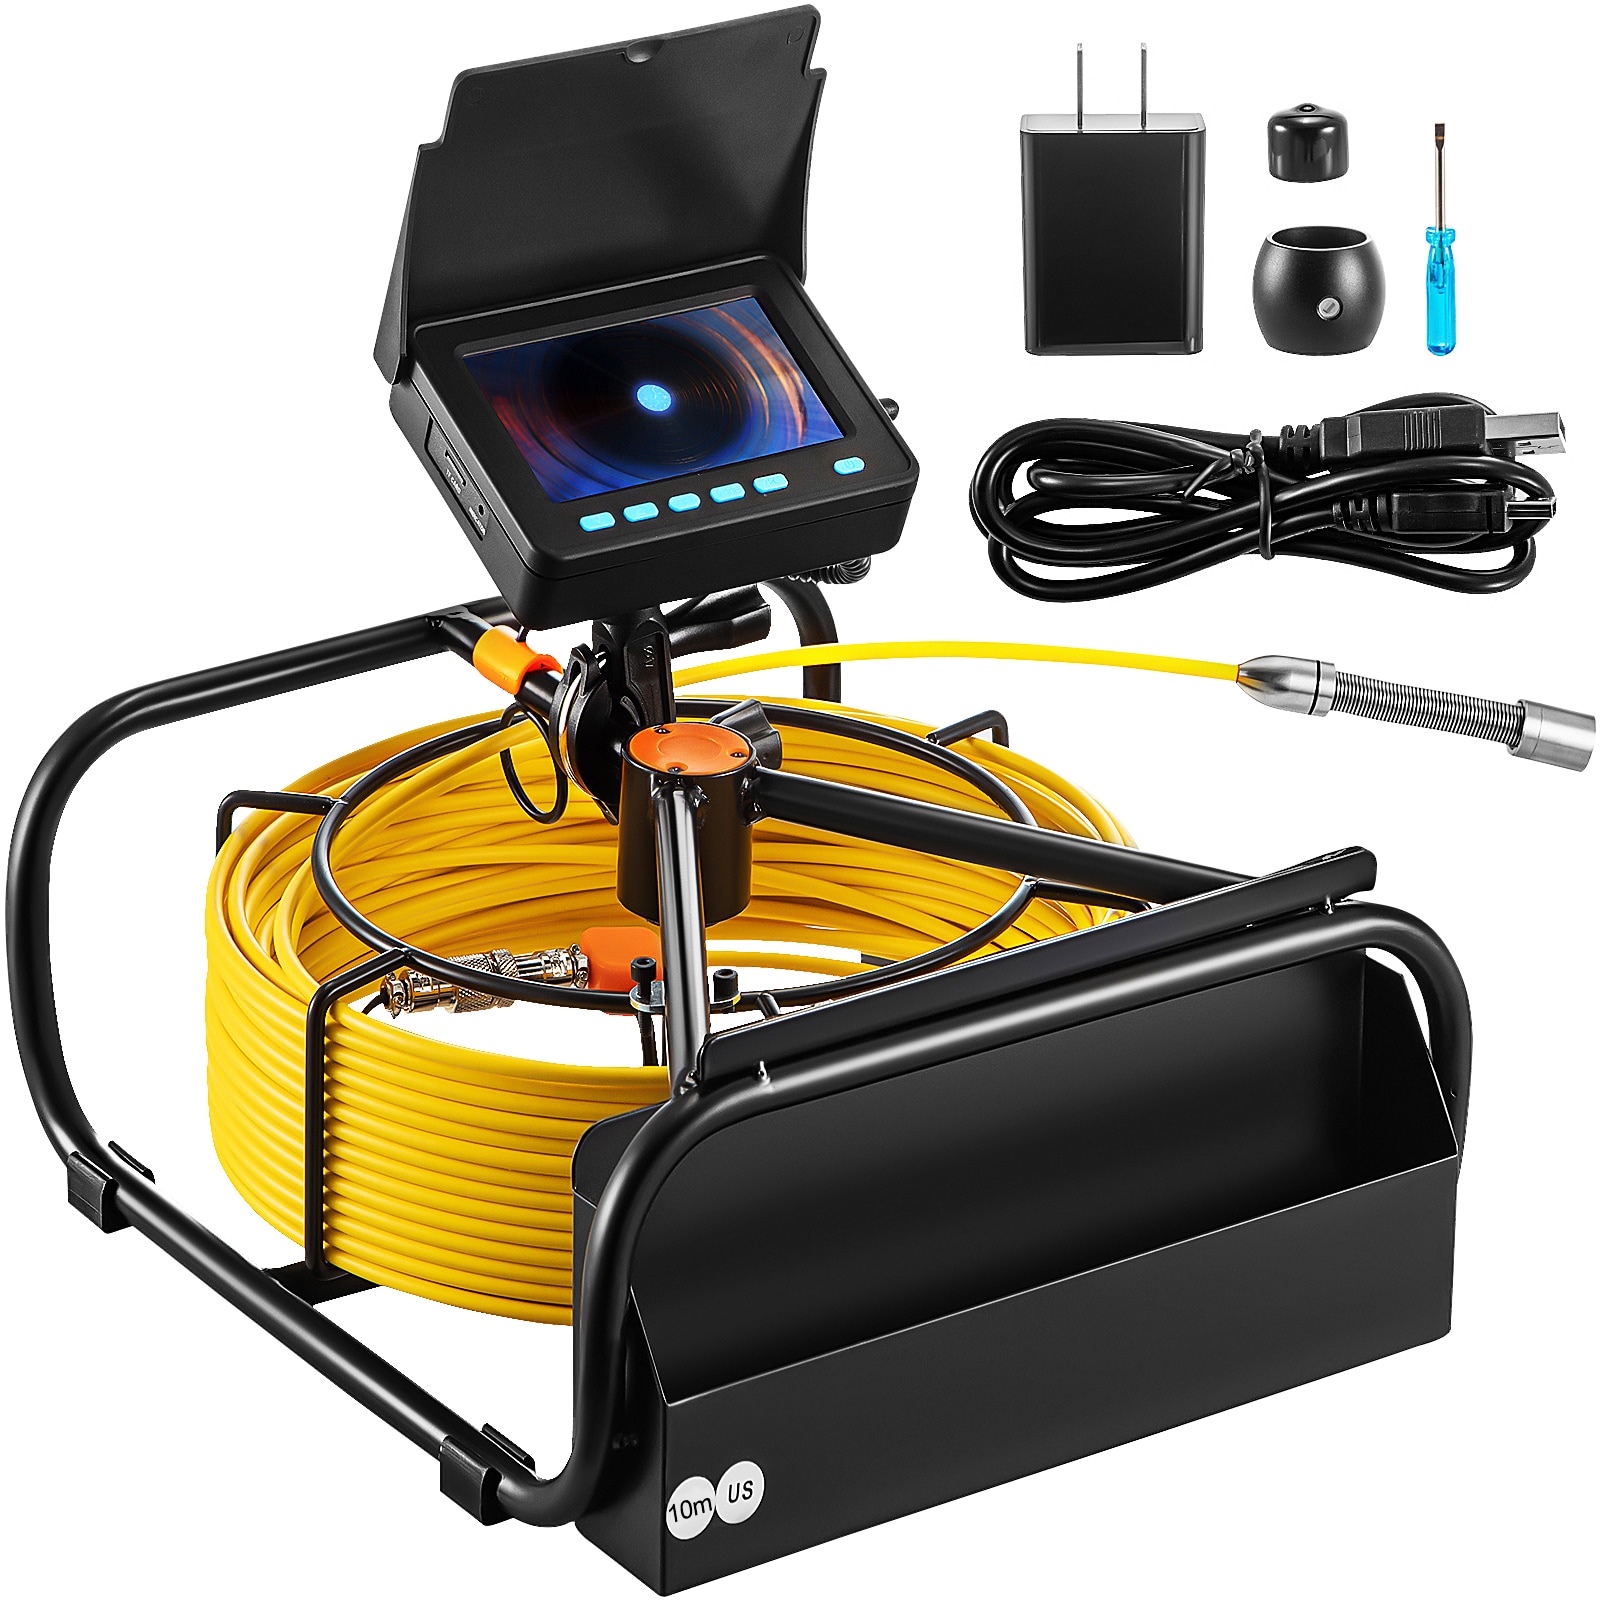 VEVOR Camera, 32.8Ft Screen, Pipeline Inspection Camera with Dvr Function and Snake Waterproof Ip68 Borescope W/Led Lights, Industrial Endoscope For Home Wall Duct Drain Pipe Plumbing in the Inspection